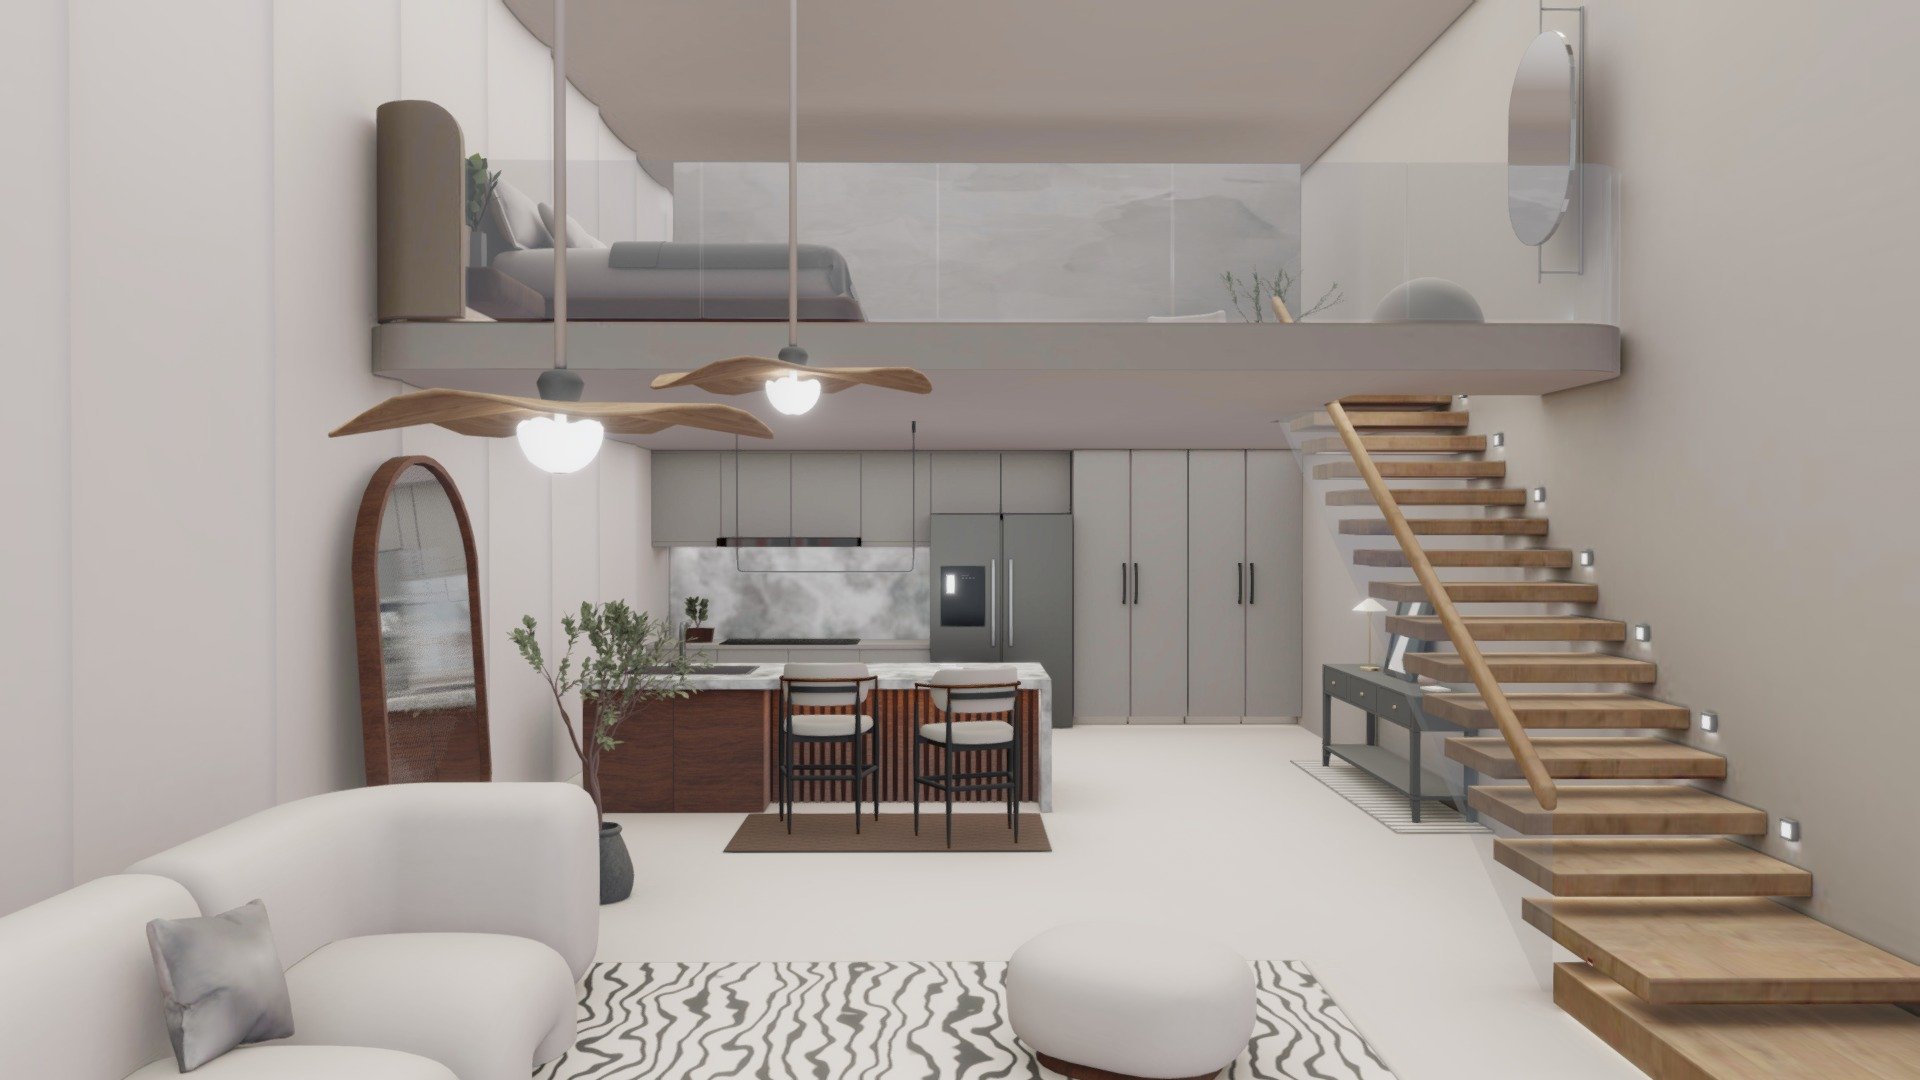 Loft design with an exterior view included !
Fully furnished with morden furnitures and aesthetic decorations.




Scaled in real world dimensions

🔥Note: Spatial seat hotspots supported ( You need to download the additional files which named “with hotspots” )

🔥Note: High quality baking pics supported ( You need to download the additional files which named “High quality baking pics” ) - VR Morden Loft | Apartment | Baked - Buy Royalty Free 3D model by ChristyHsu (@ida61xq) 3d model